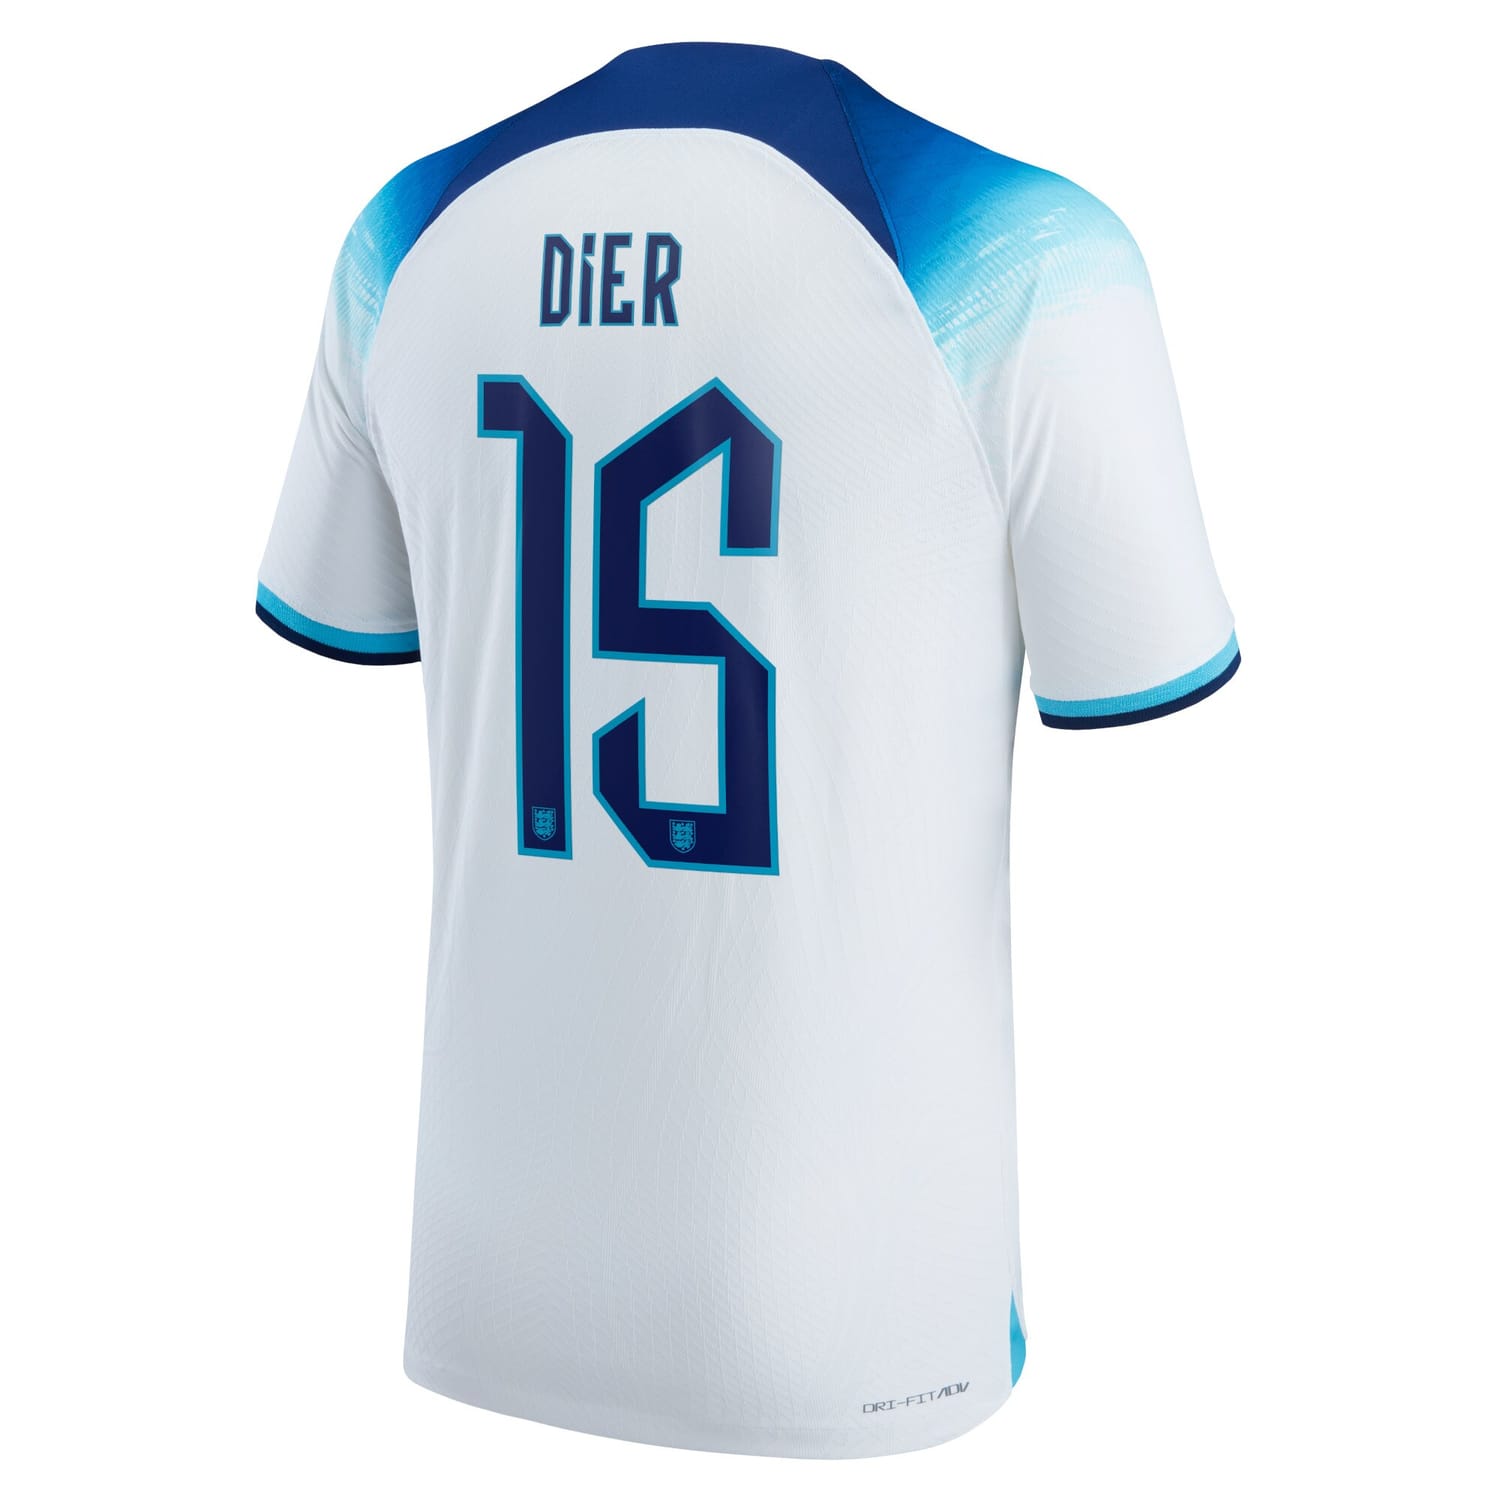 England National Team Home Authentic Jersey Shirt 2022 player Eric Dier 15 printing for Men